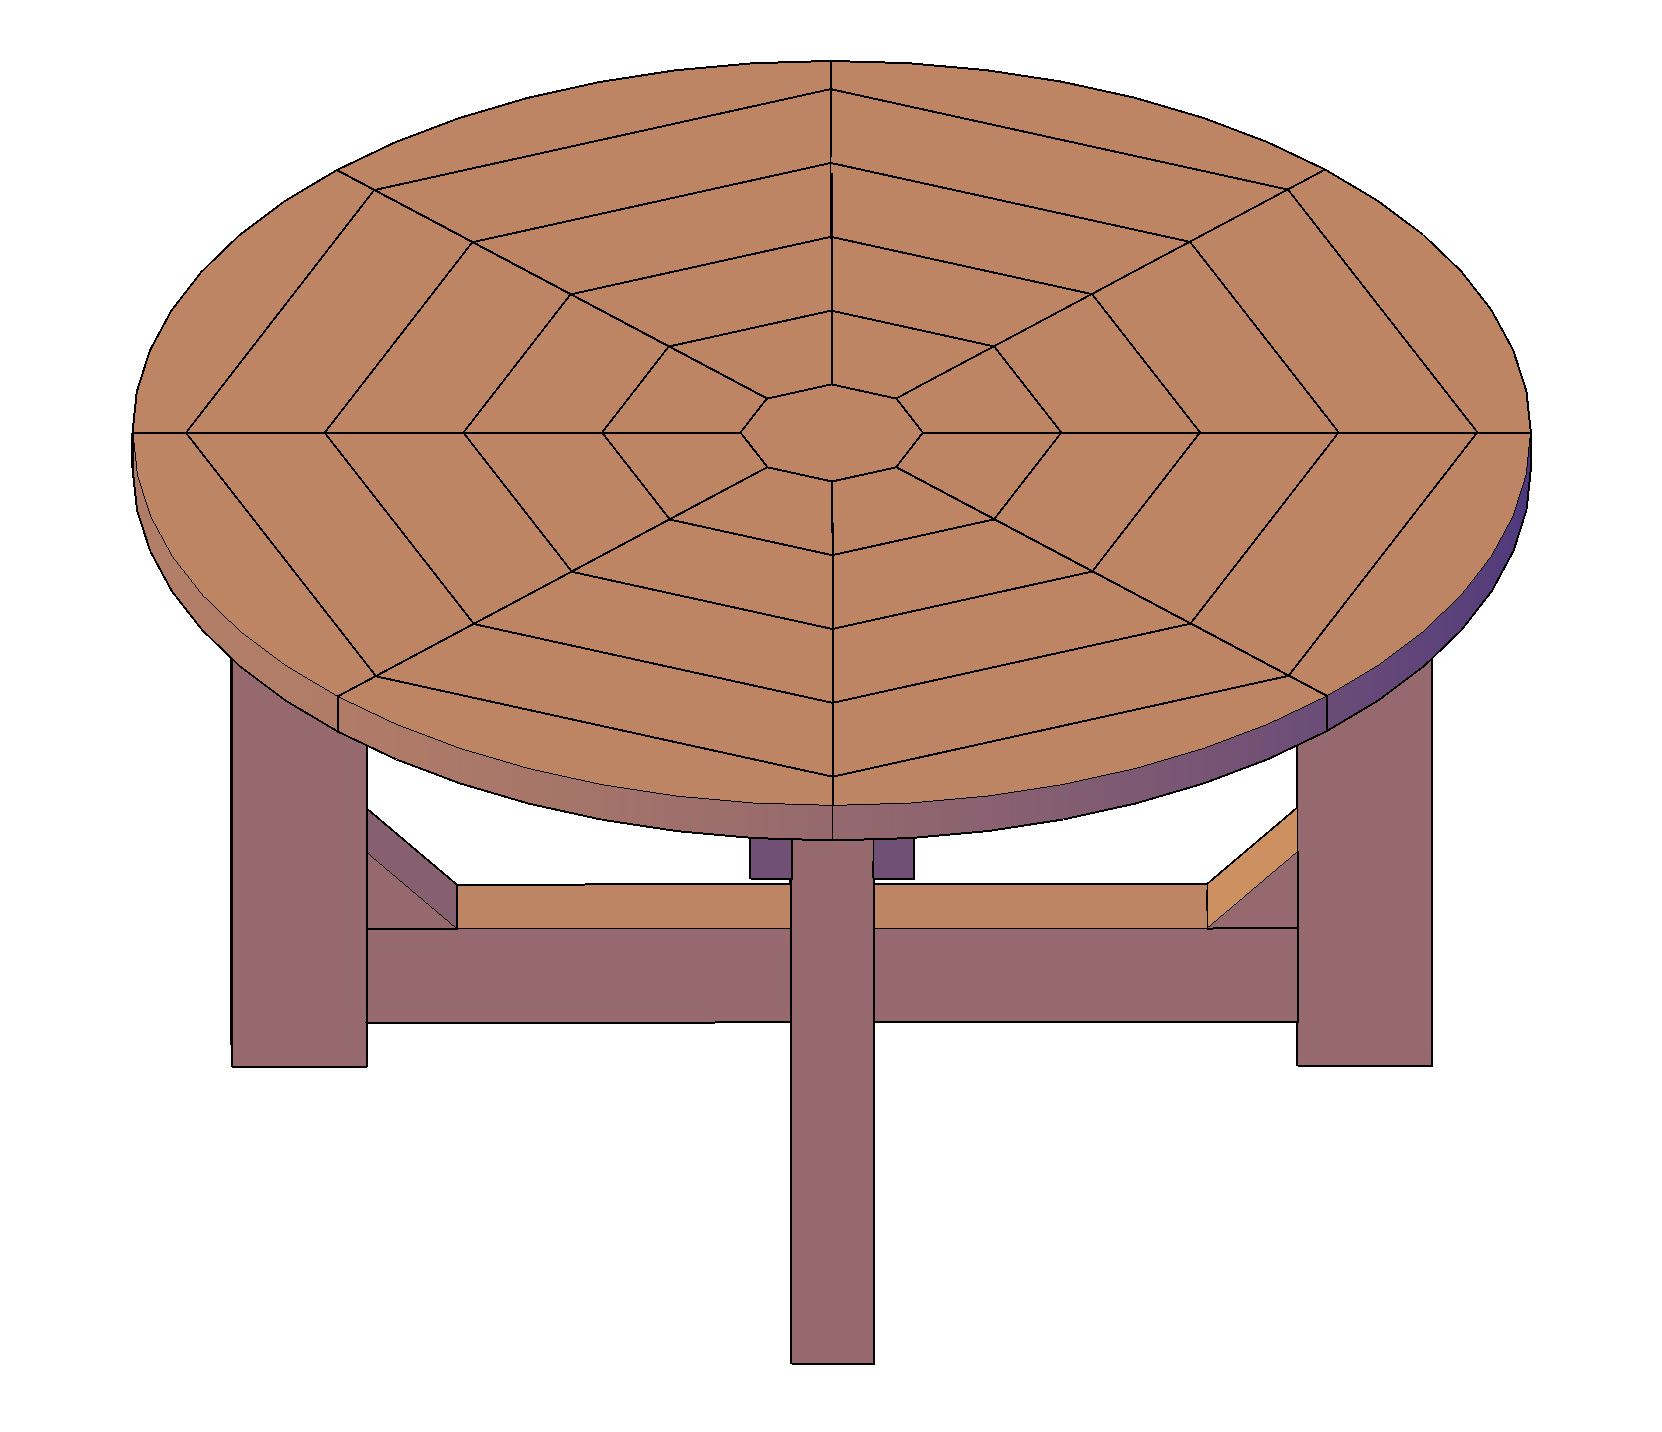 The-Octagonal-Patio-Table-Rounded-Isometric.jpg